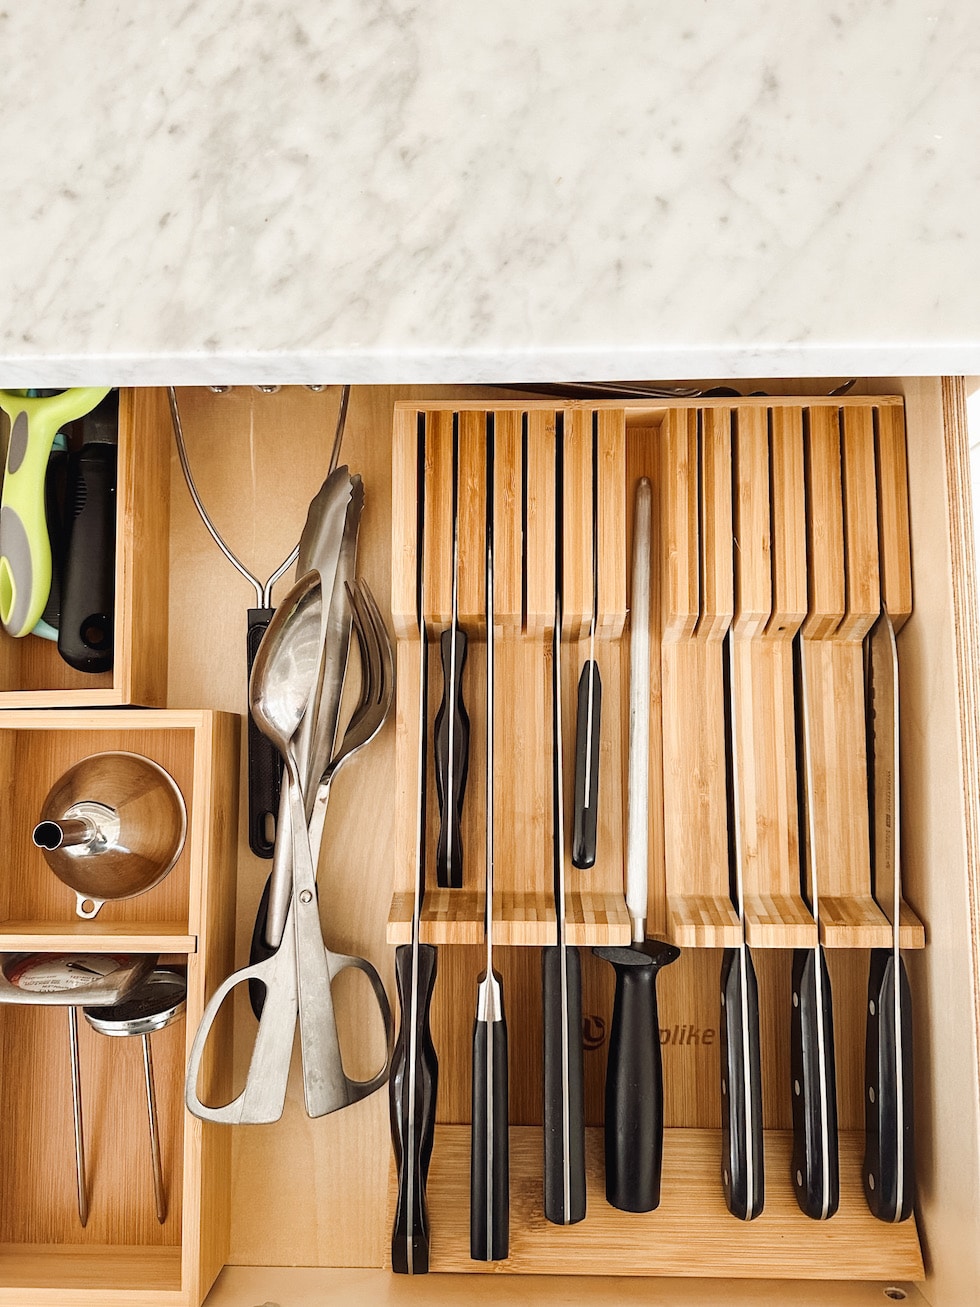 Getting Organized in the Kitchen